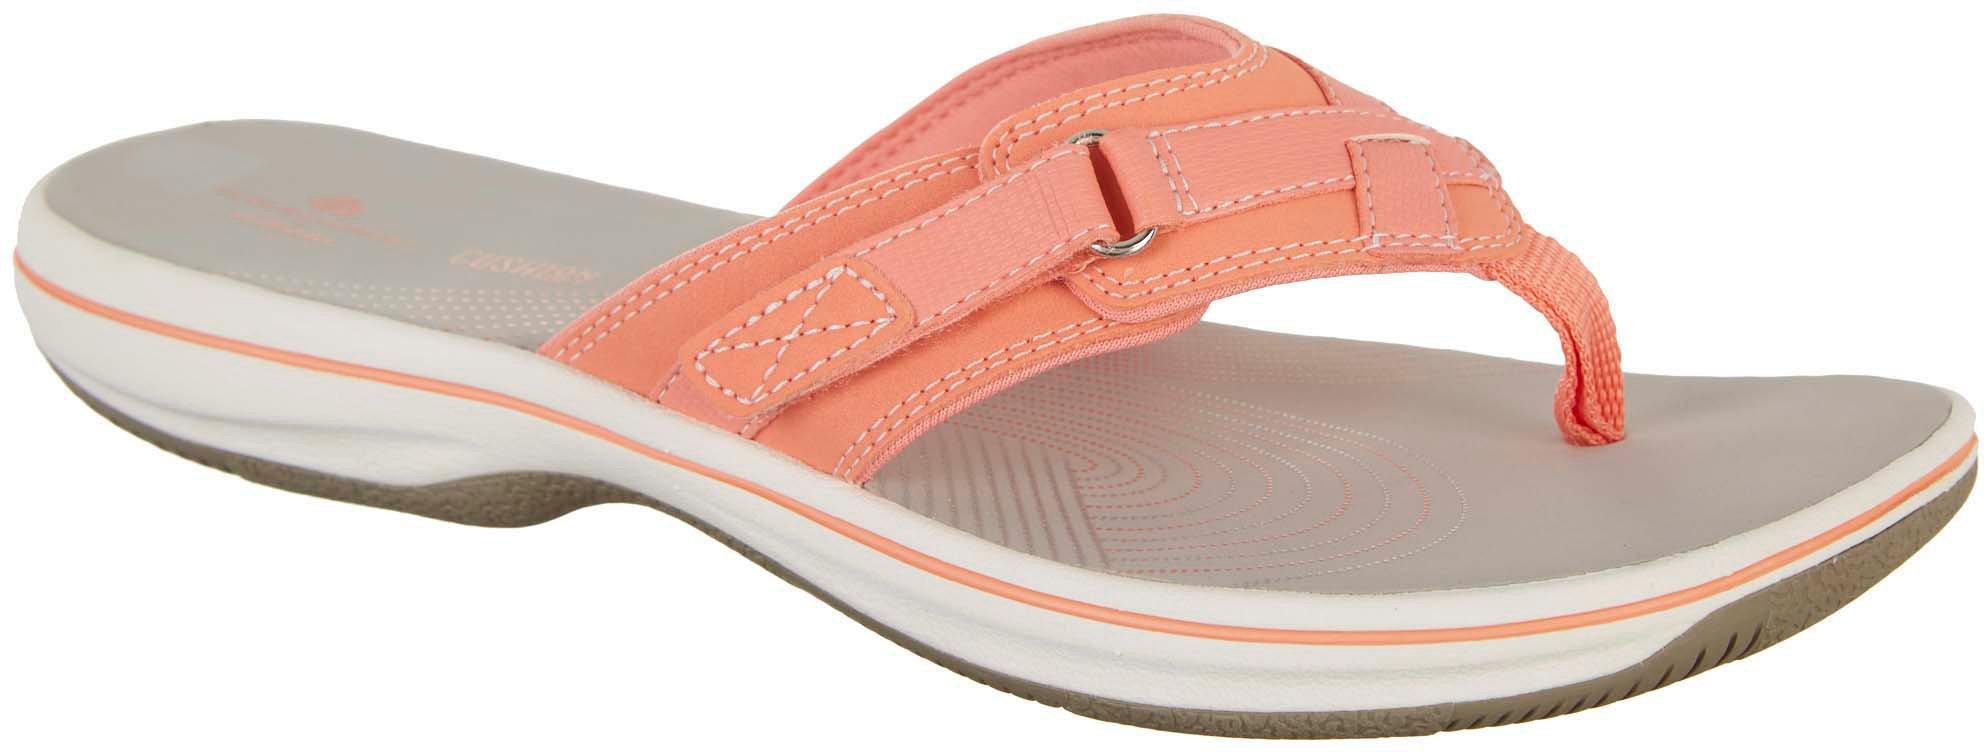 Athletic Shoes and Sandals | Bealls Florida